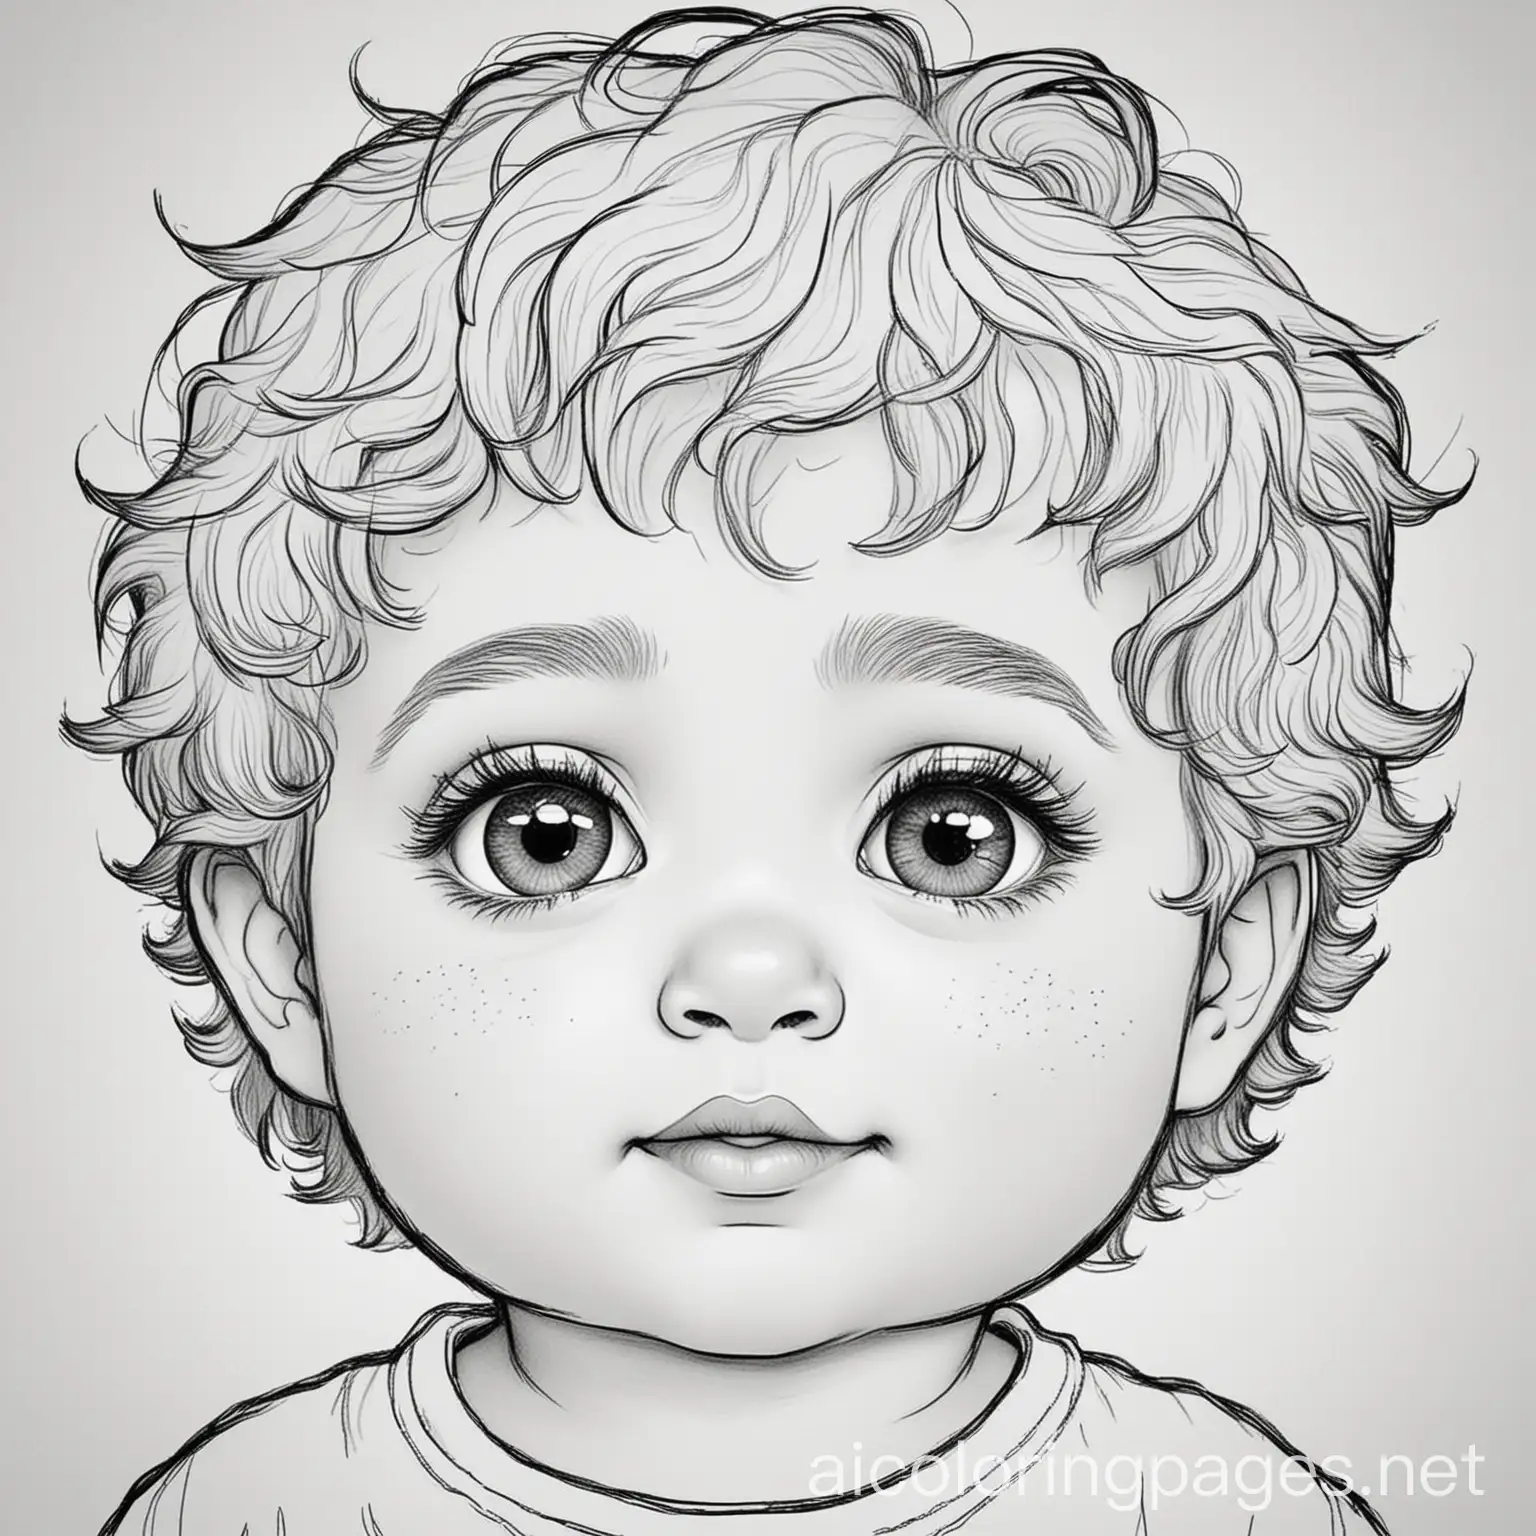 Baby boy twins with wavy hair and big eyes, and a chubby face, Coloring Page, black and white, line art, white background, Simplicity, Ample White Space. The background of the coloring page is plain white to make it easy for young children to color within the lines. The outlines of all the subjects are easy to distinguish, making it simple for kids to color without too much difficulty